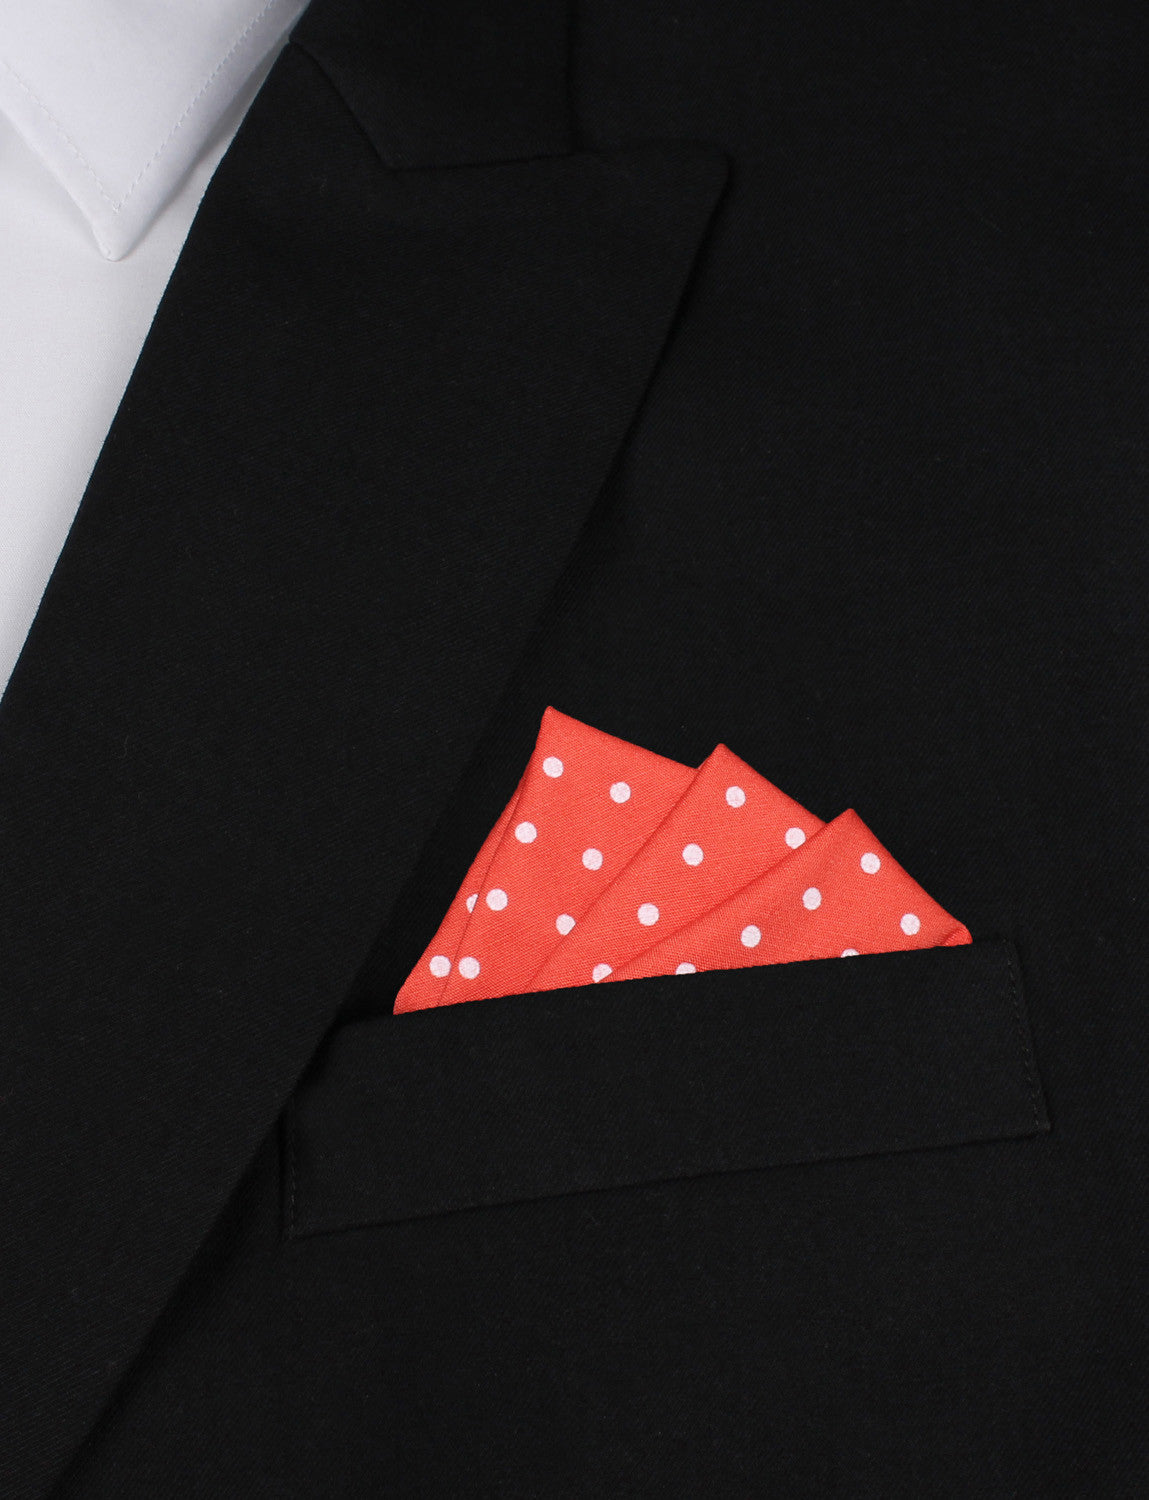 Cinnabar Red with White Polka Dots Cotton Oxygen Three Point Pocket Square Fold